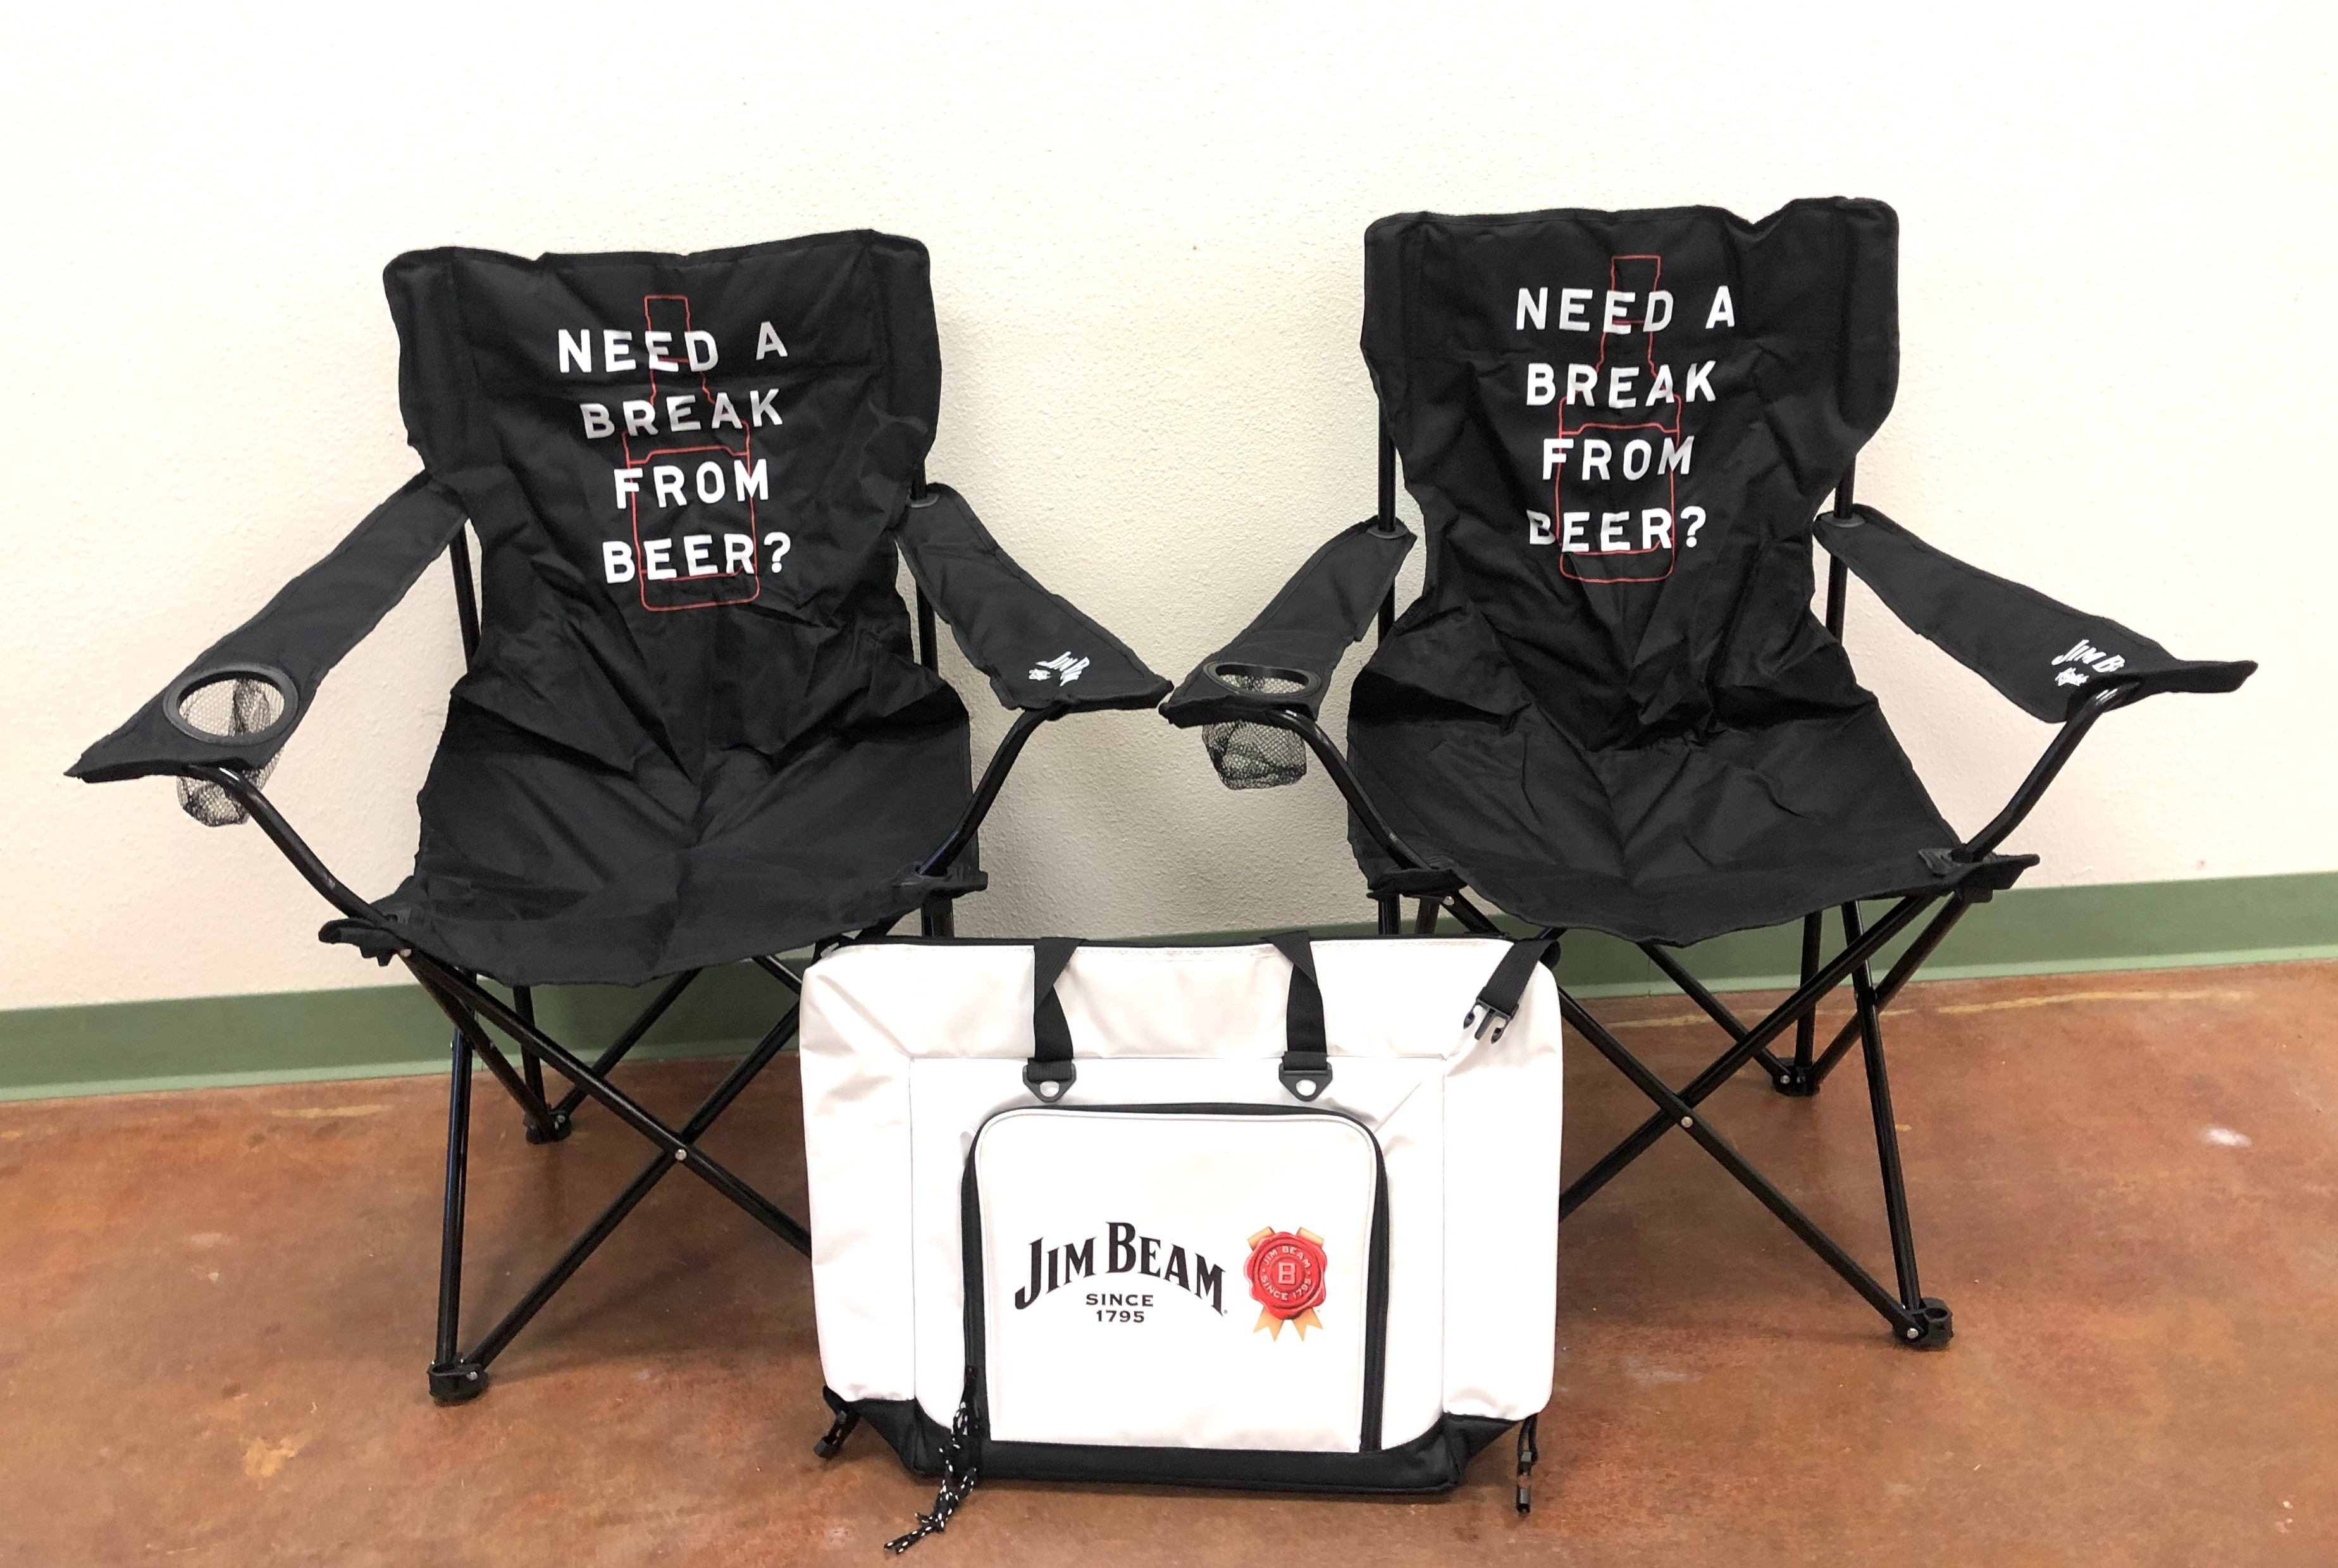 Jim Beam Fold Out Chairs (2), Jim Beam Insulated Cooler Bag